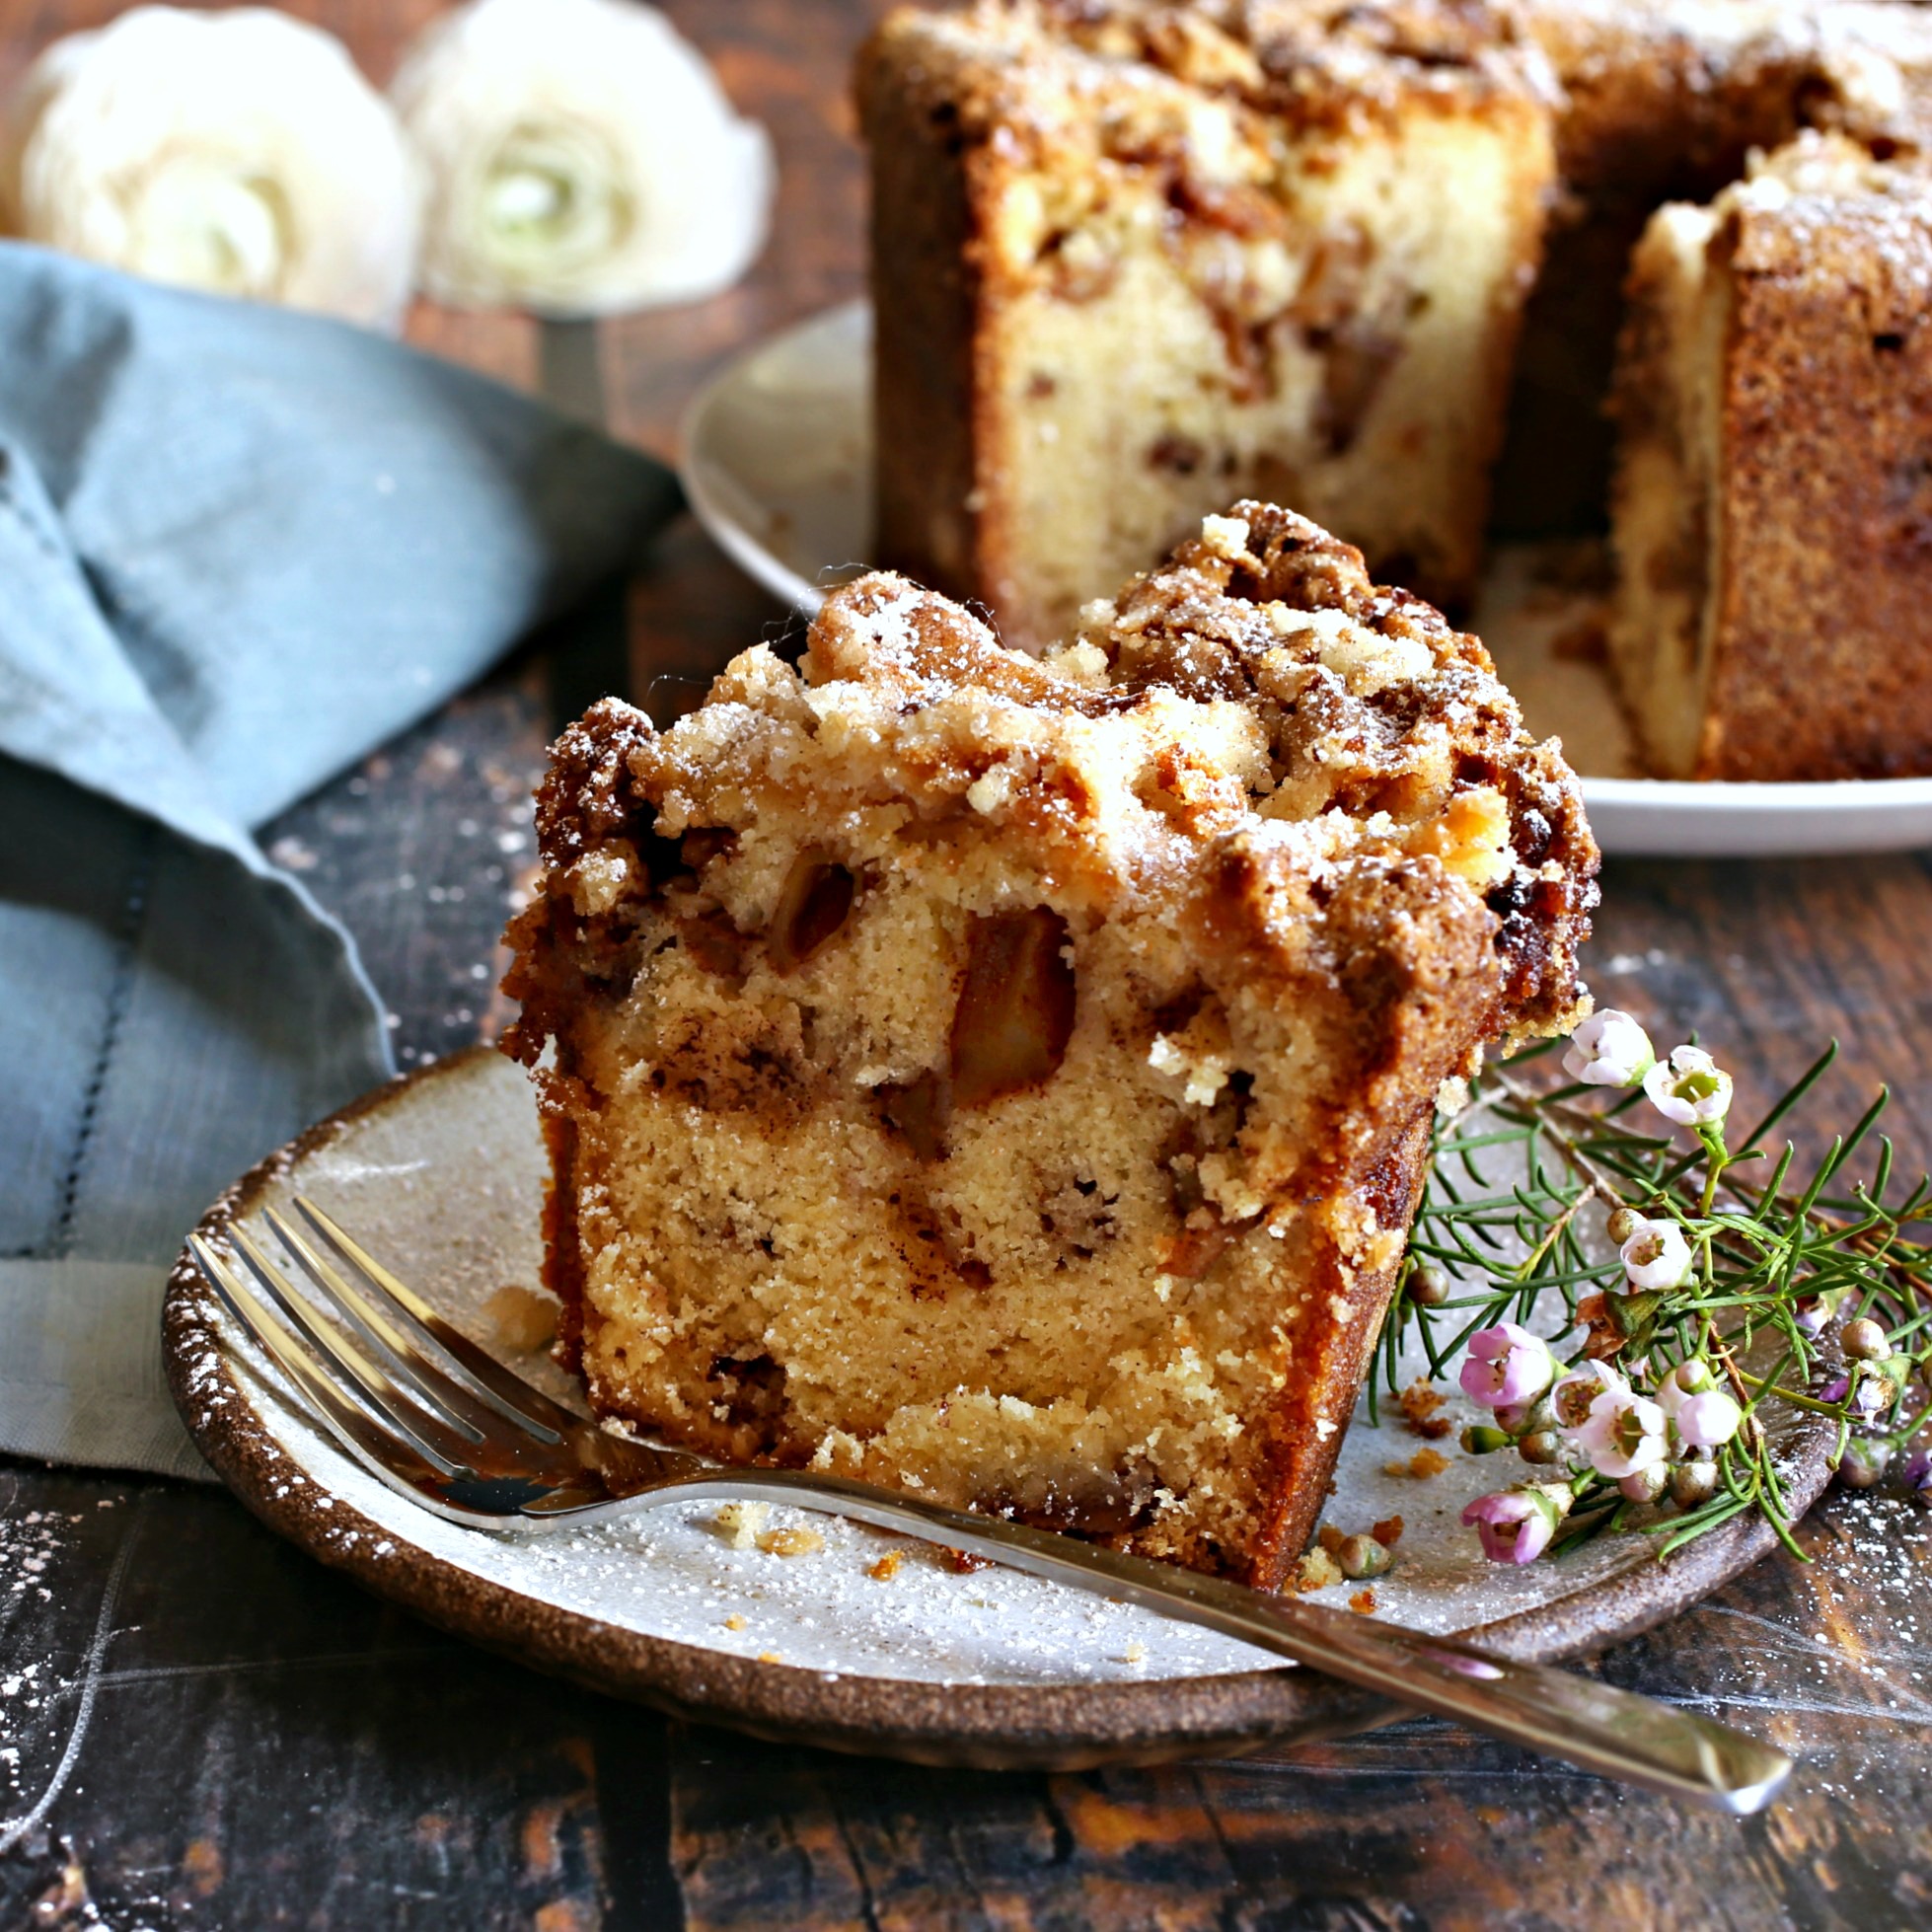 Recipe for a tall cake, bursting with apples, and topped with a brown sugar crust.